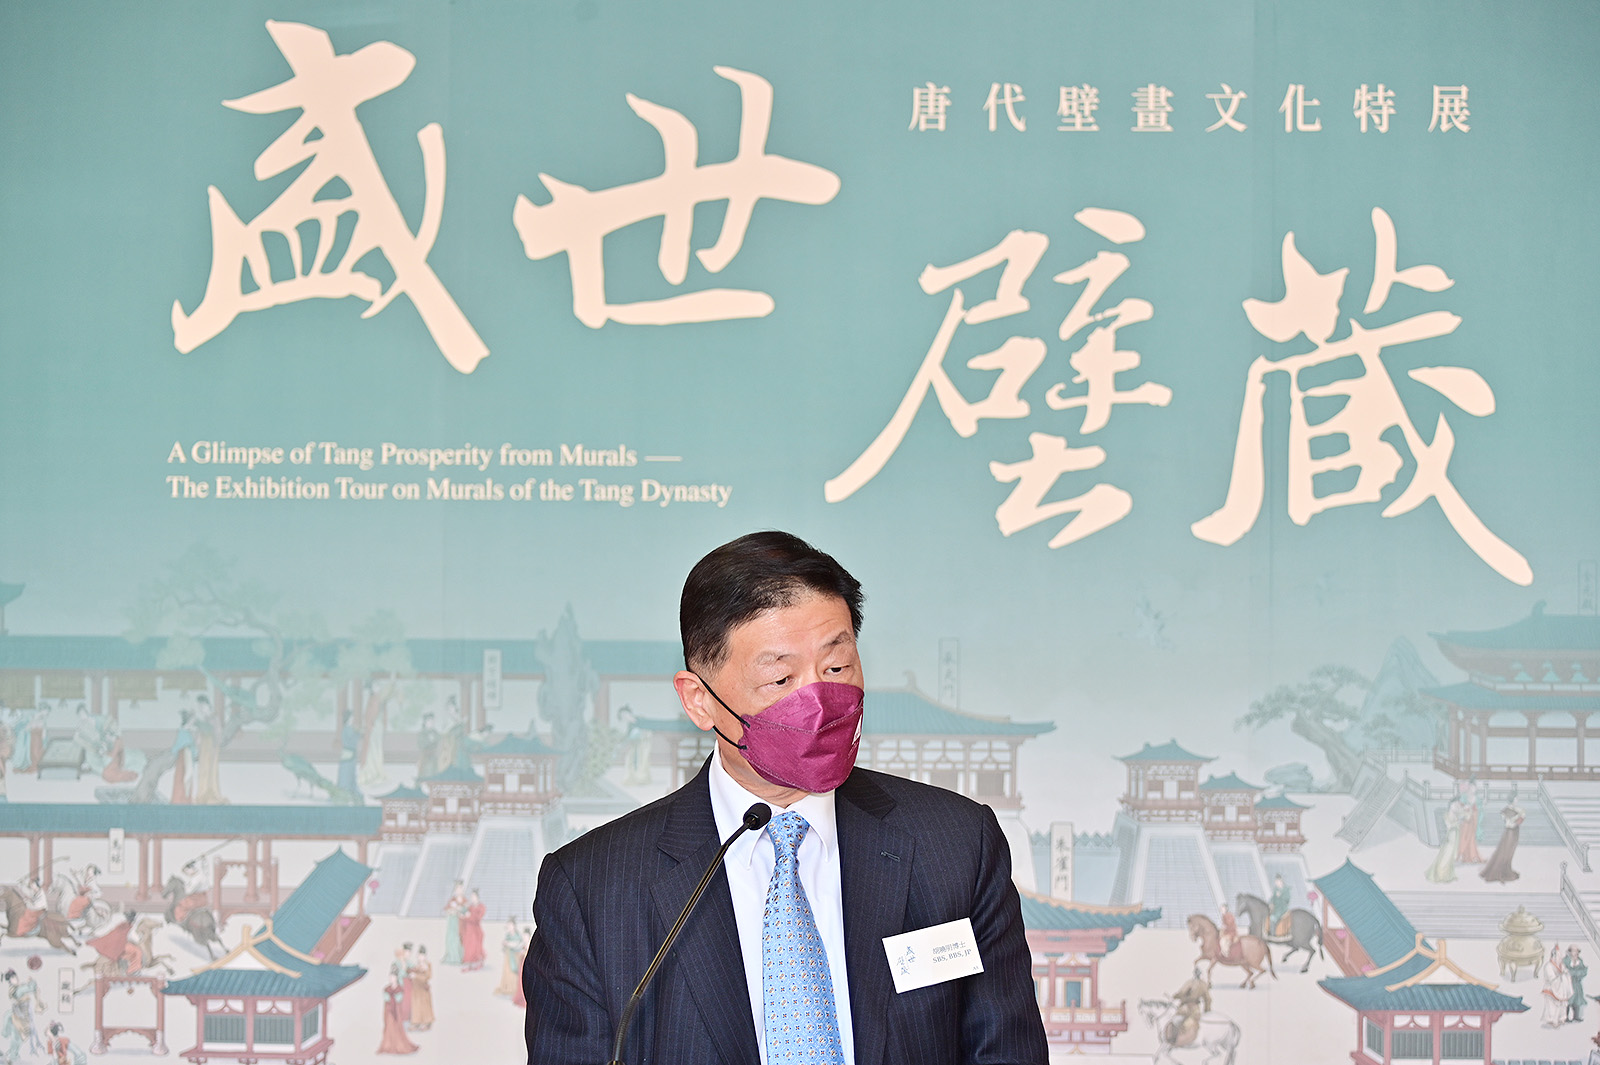 Dr Hu wishes that the exhibition can inspire audiences’ interest in Chinese history and culture.